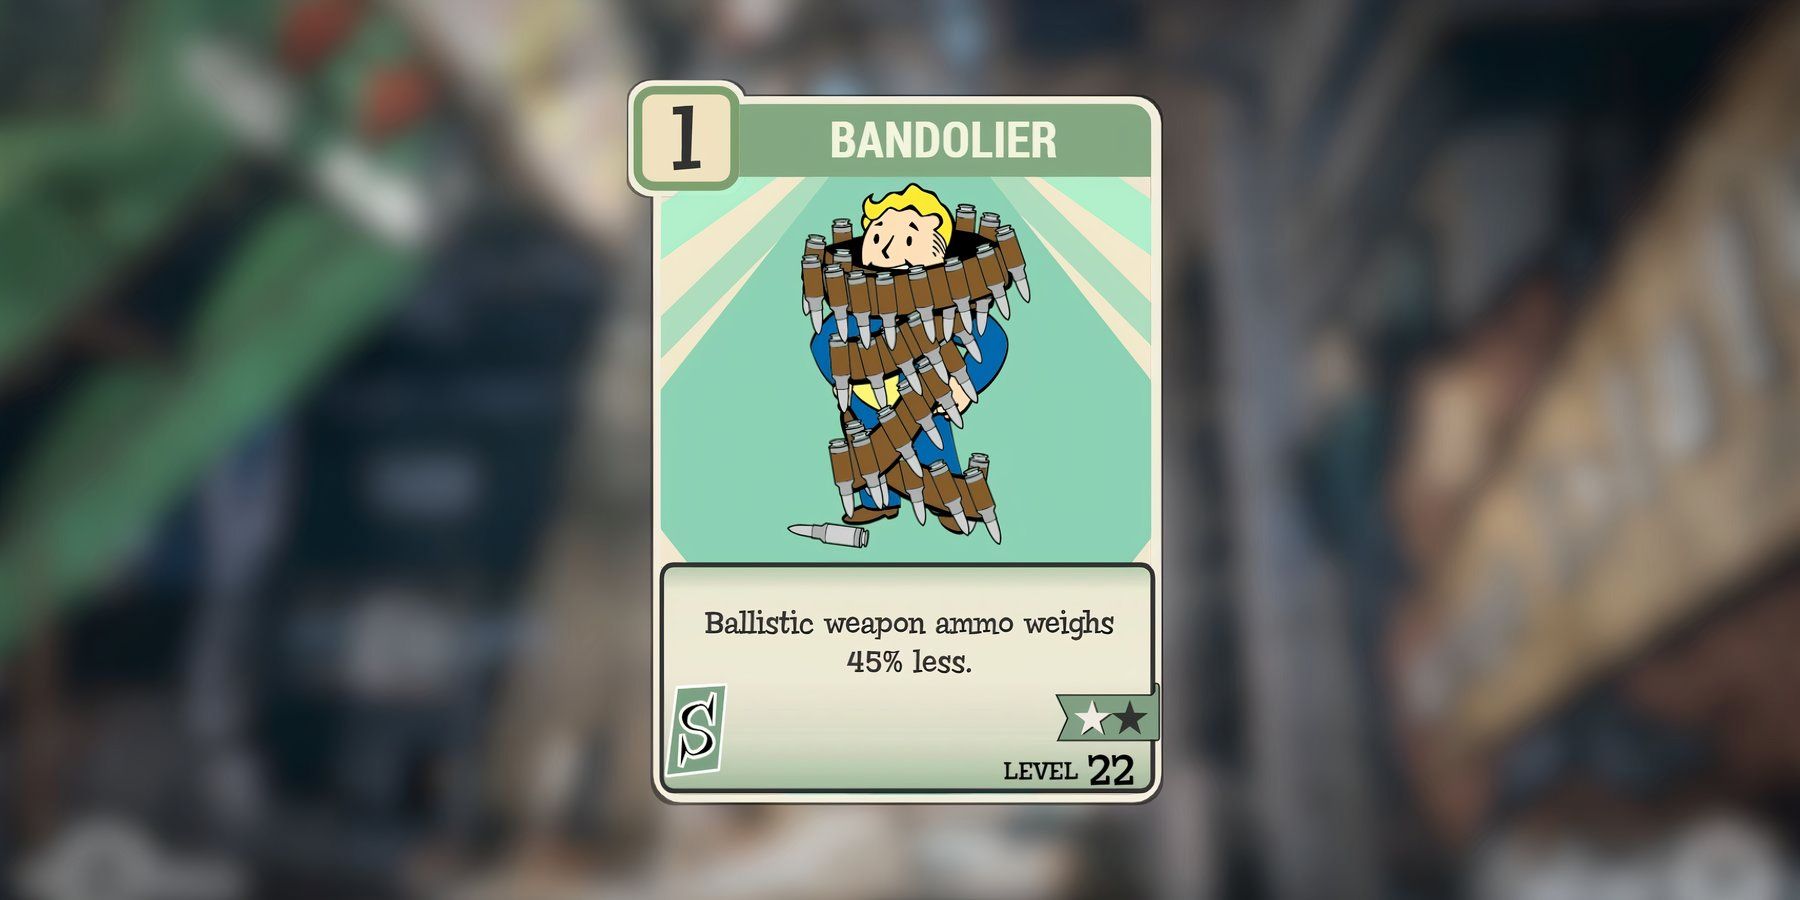 the bandolier perk card in fallout 76.